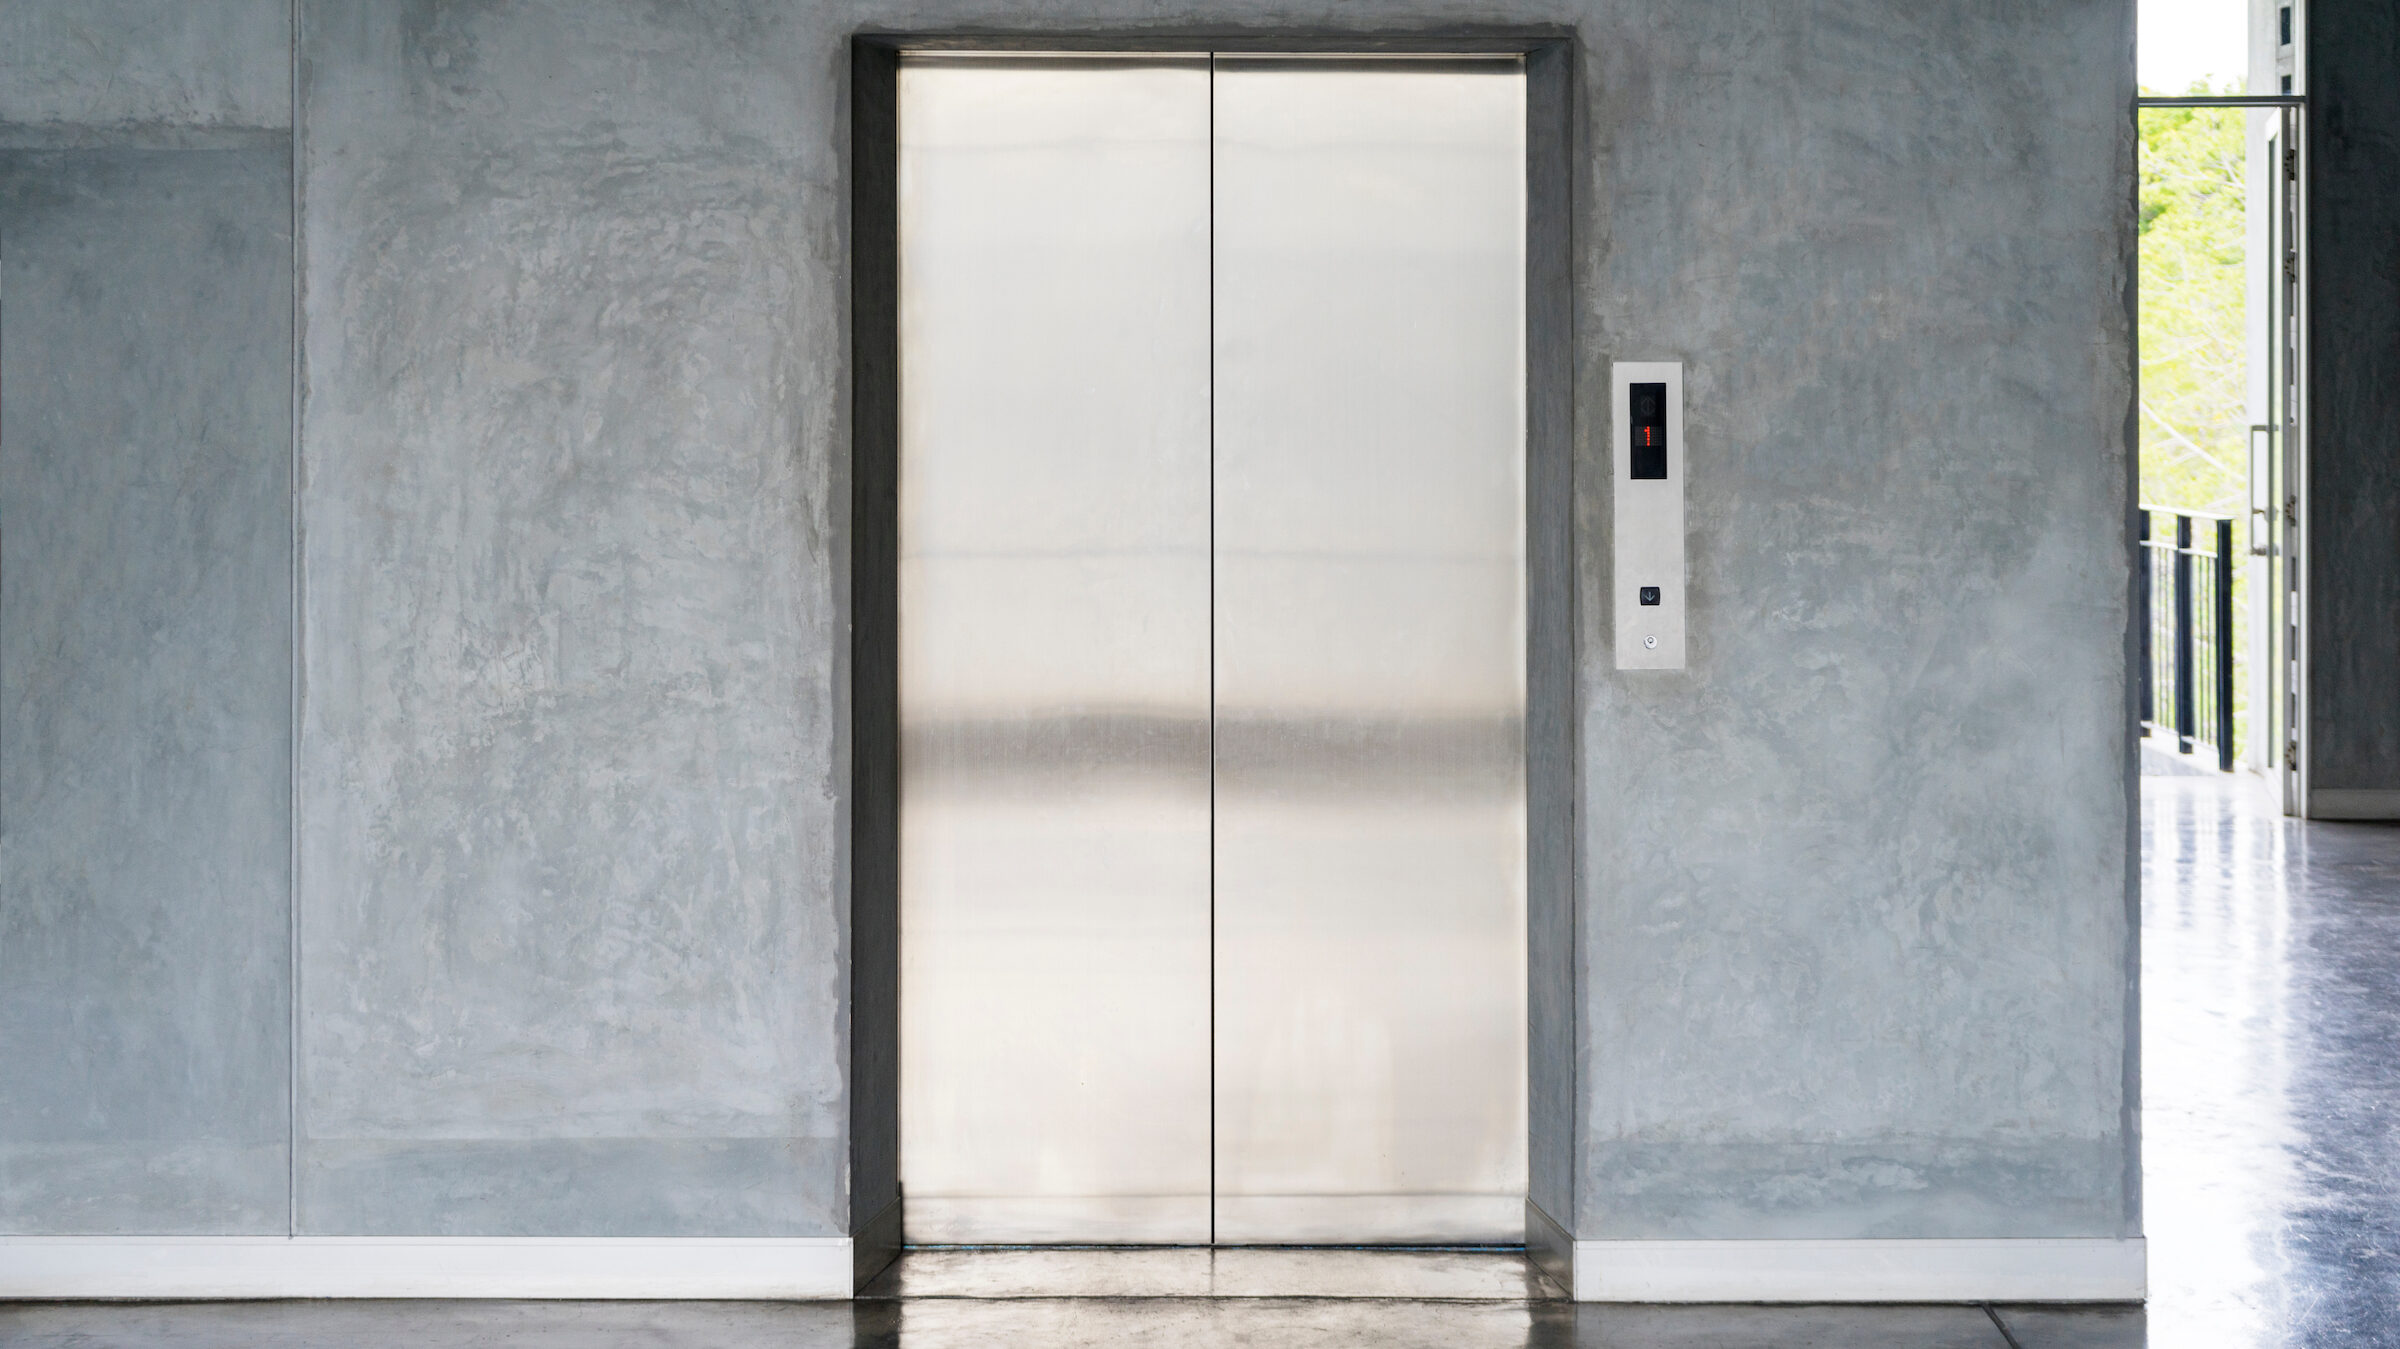 Can I Seek Damages After Being Injured In An Elevator Accident